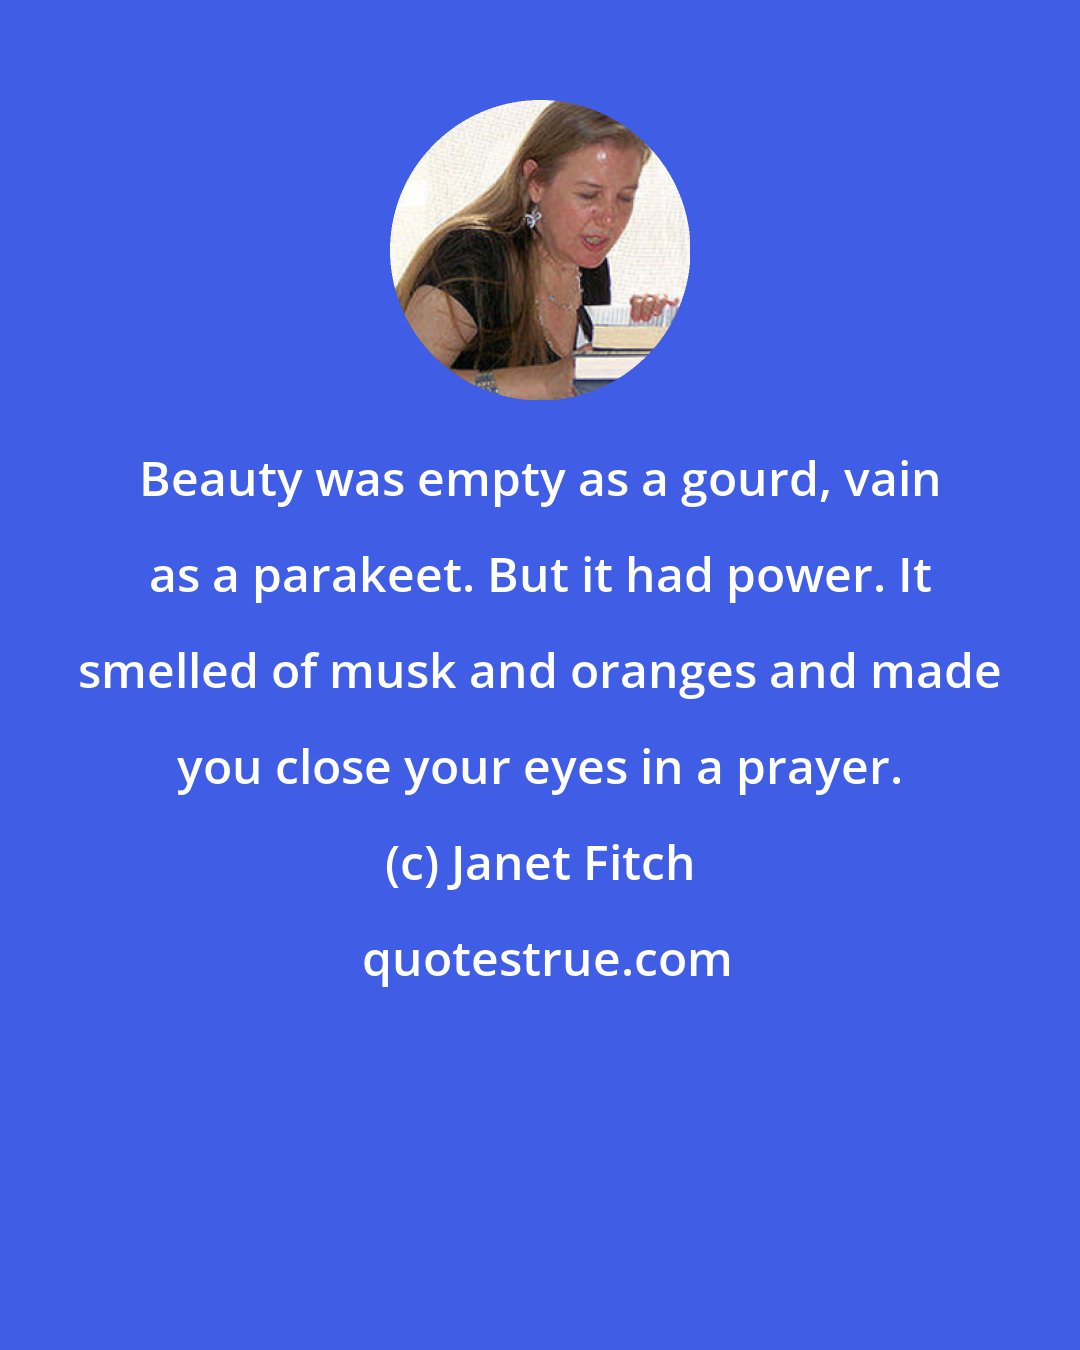 Janet Fitch: Beauty was empty as a gourd, vain as a parakeet. But it had power. It smelled of musk and oranges and made you close your eyes in a prayer.